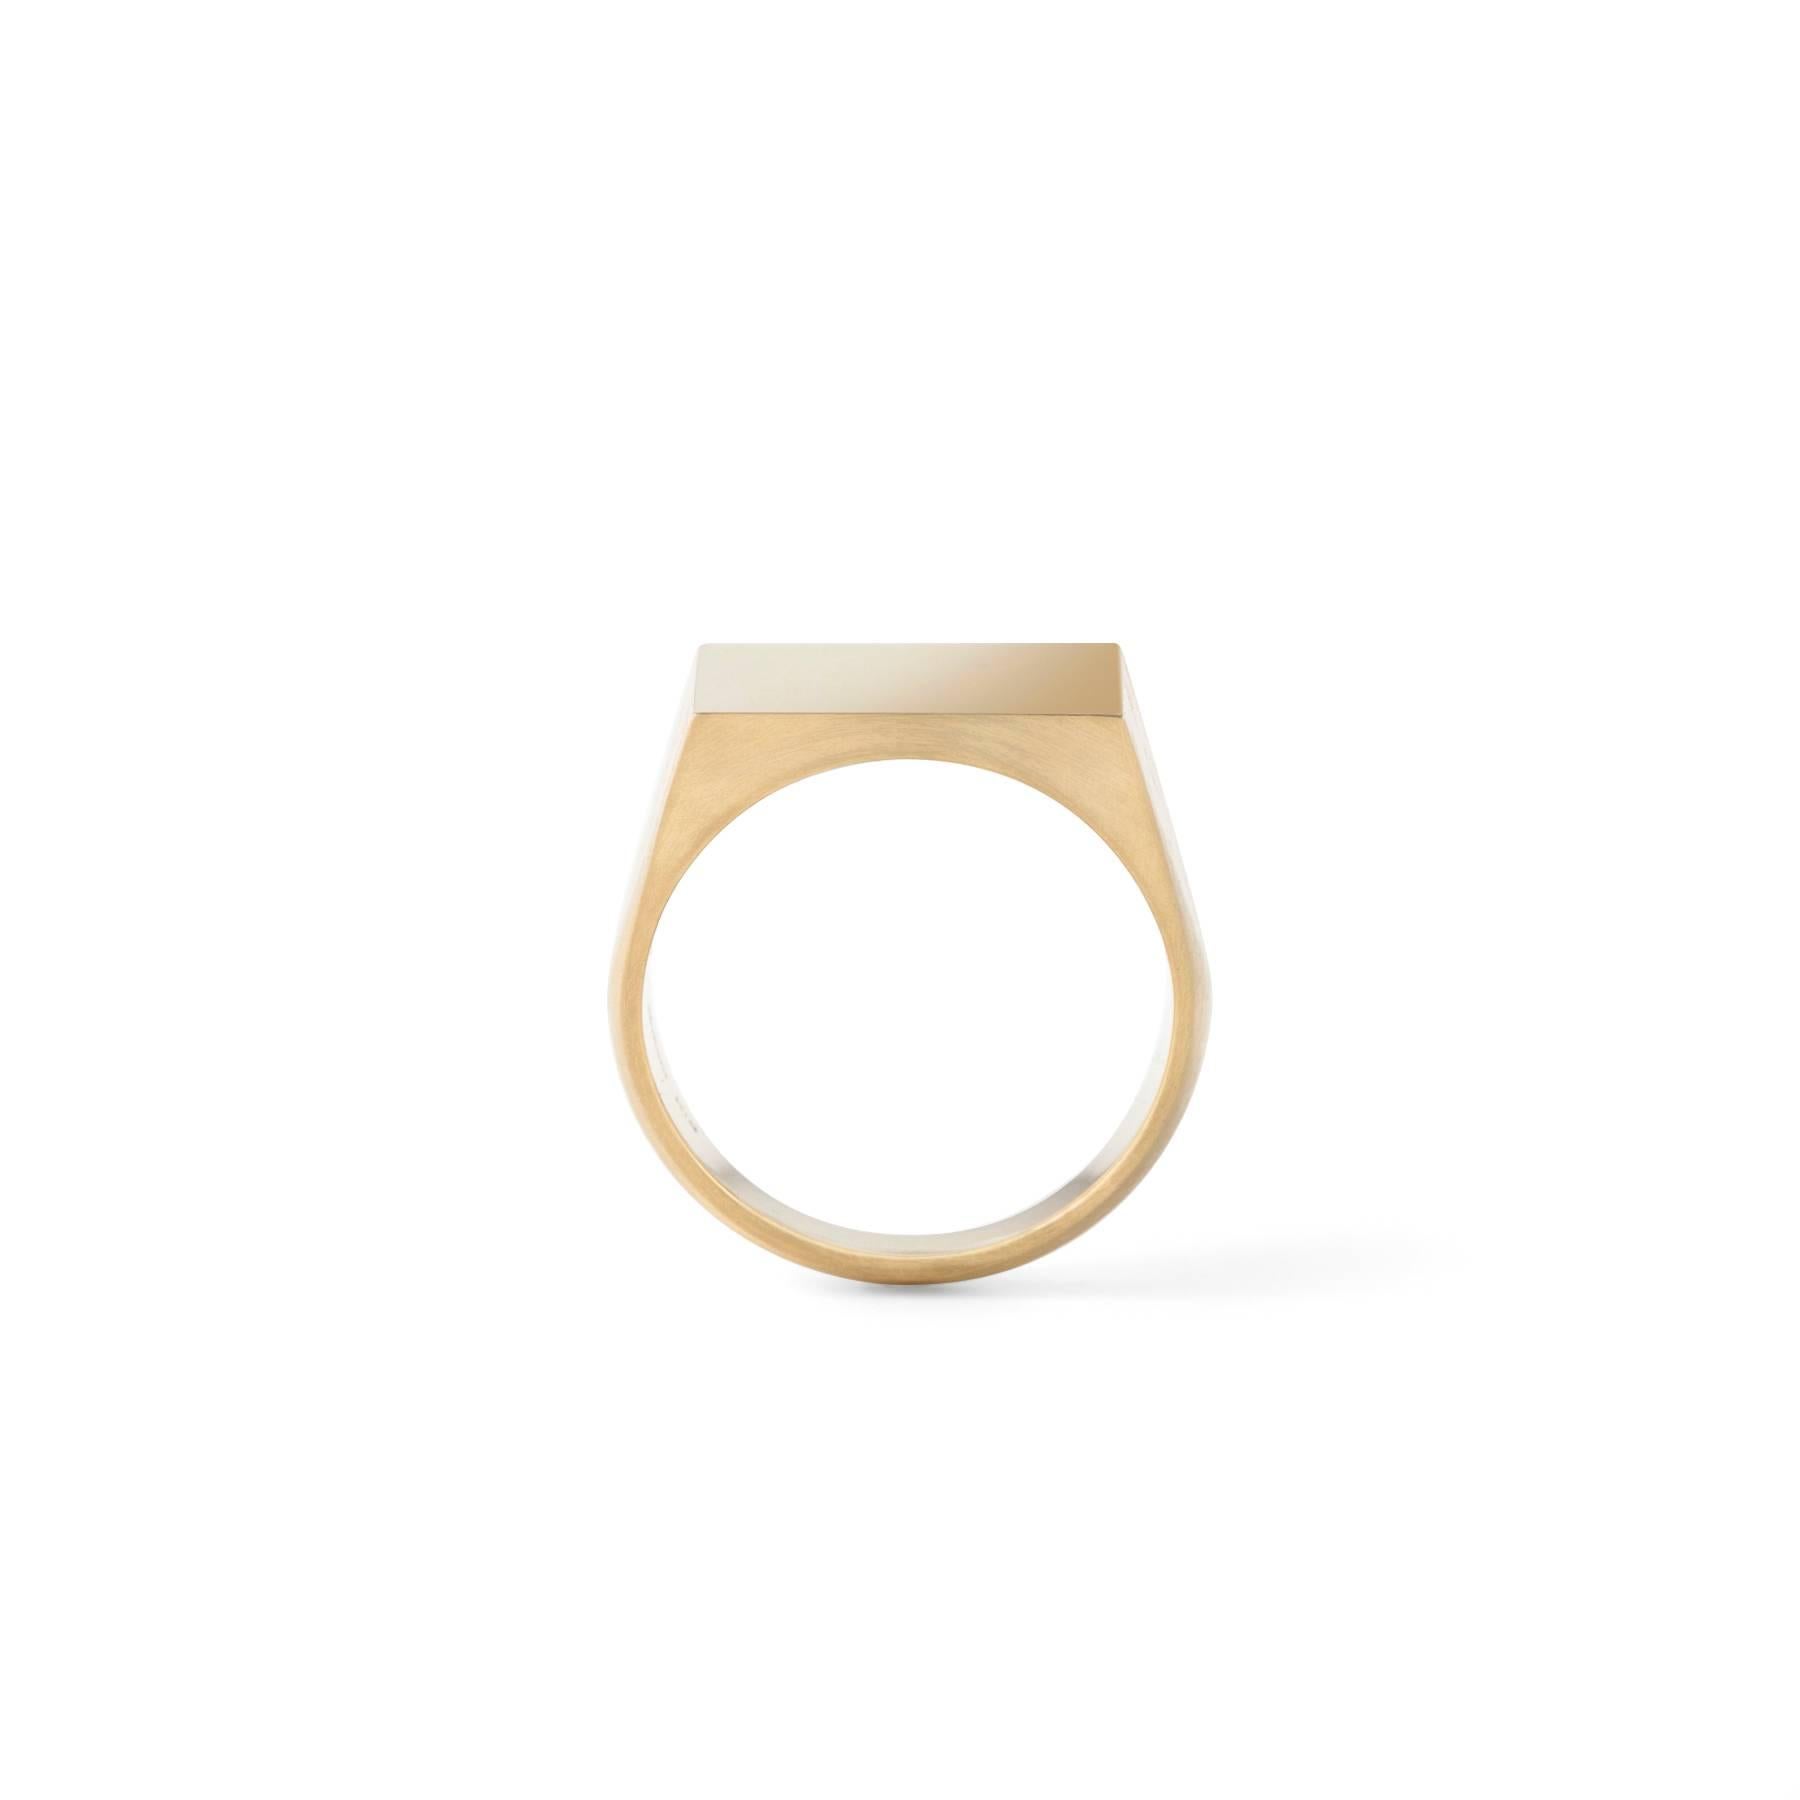 A classic square signet ring made of 18 karat yellow gold. The signet surface and inside the ring band is polished in contrast to the surface of the ring band which is matte.

18 Karat Yellow Gold Square Signet Ring
Japan Size #3～#12 
Signet top